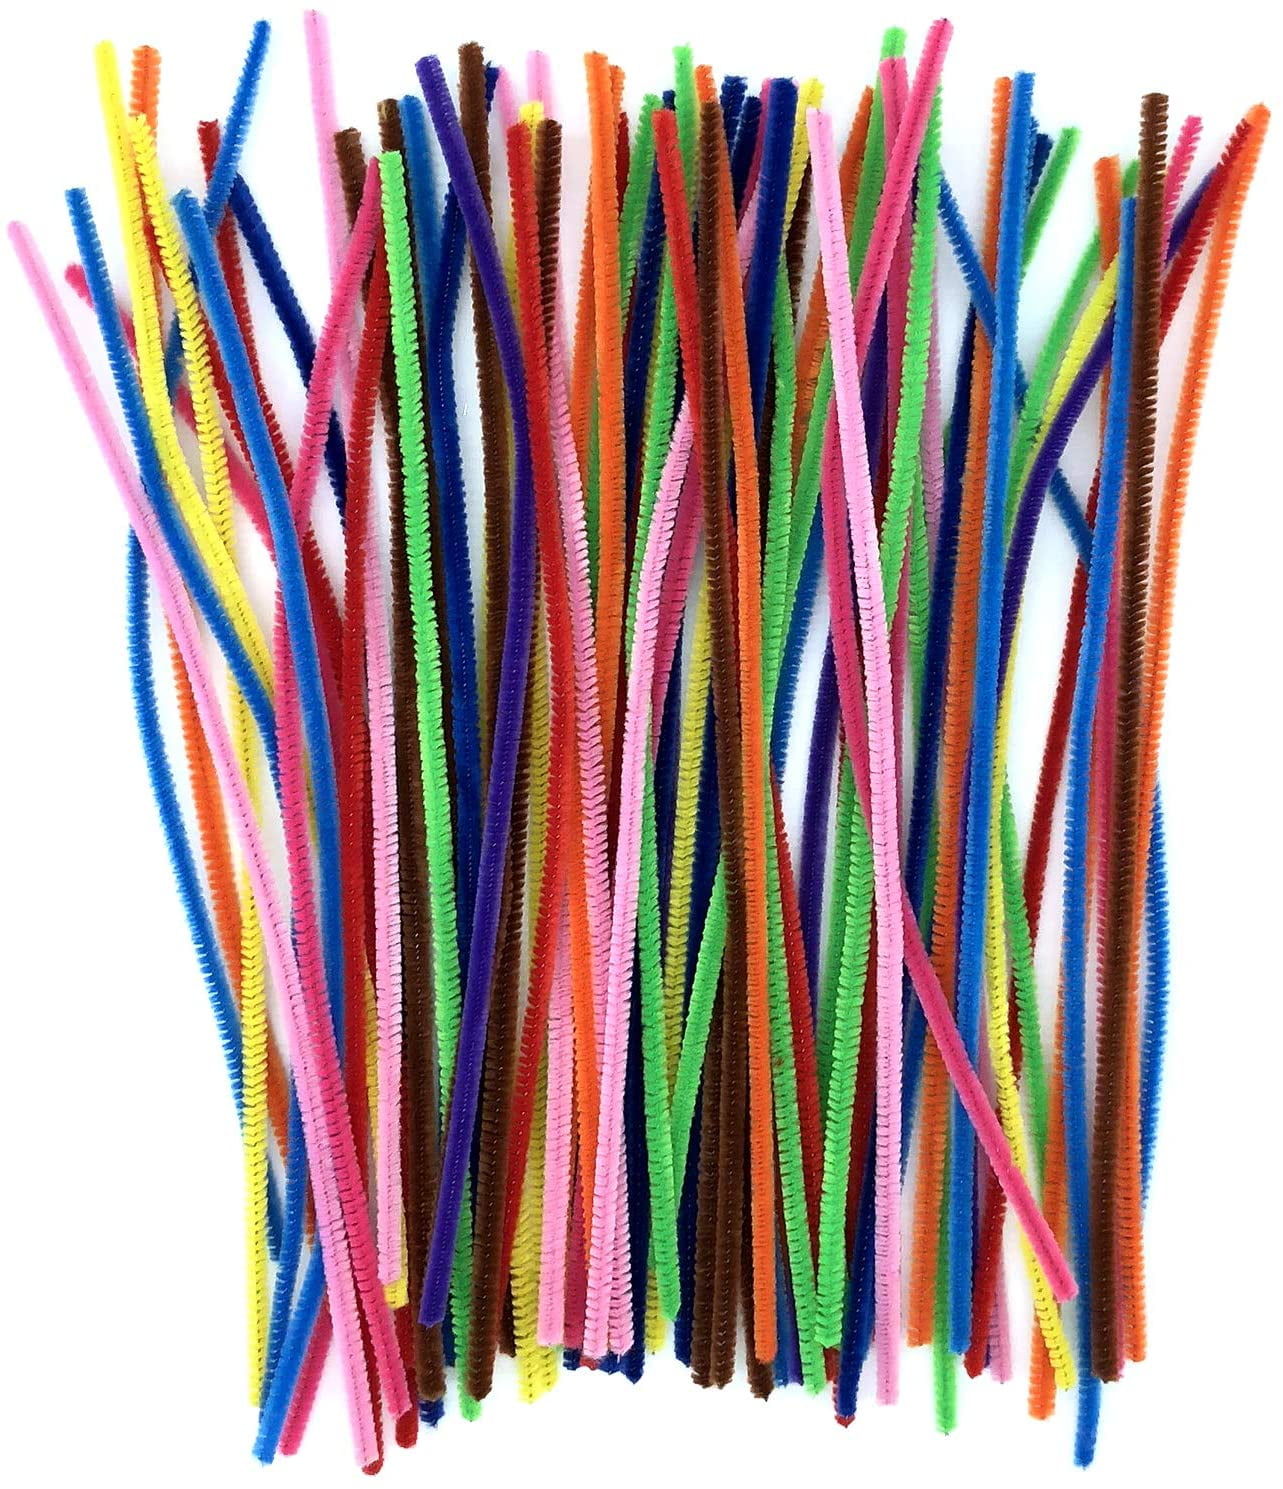 Long,6mm Wide-Kids Craft DIY 12" 100PCS Chenille Craft Stems Pipe Cleaners 30cm 